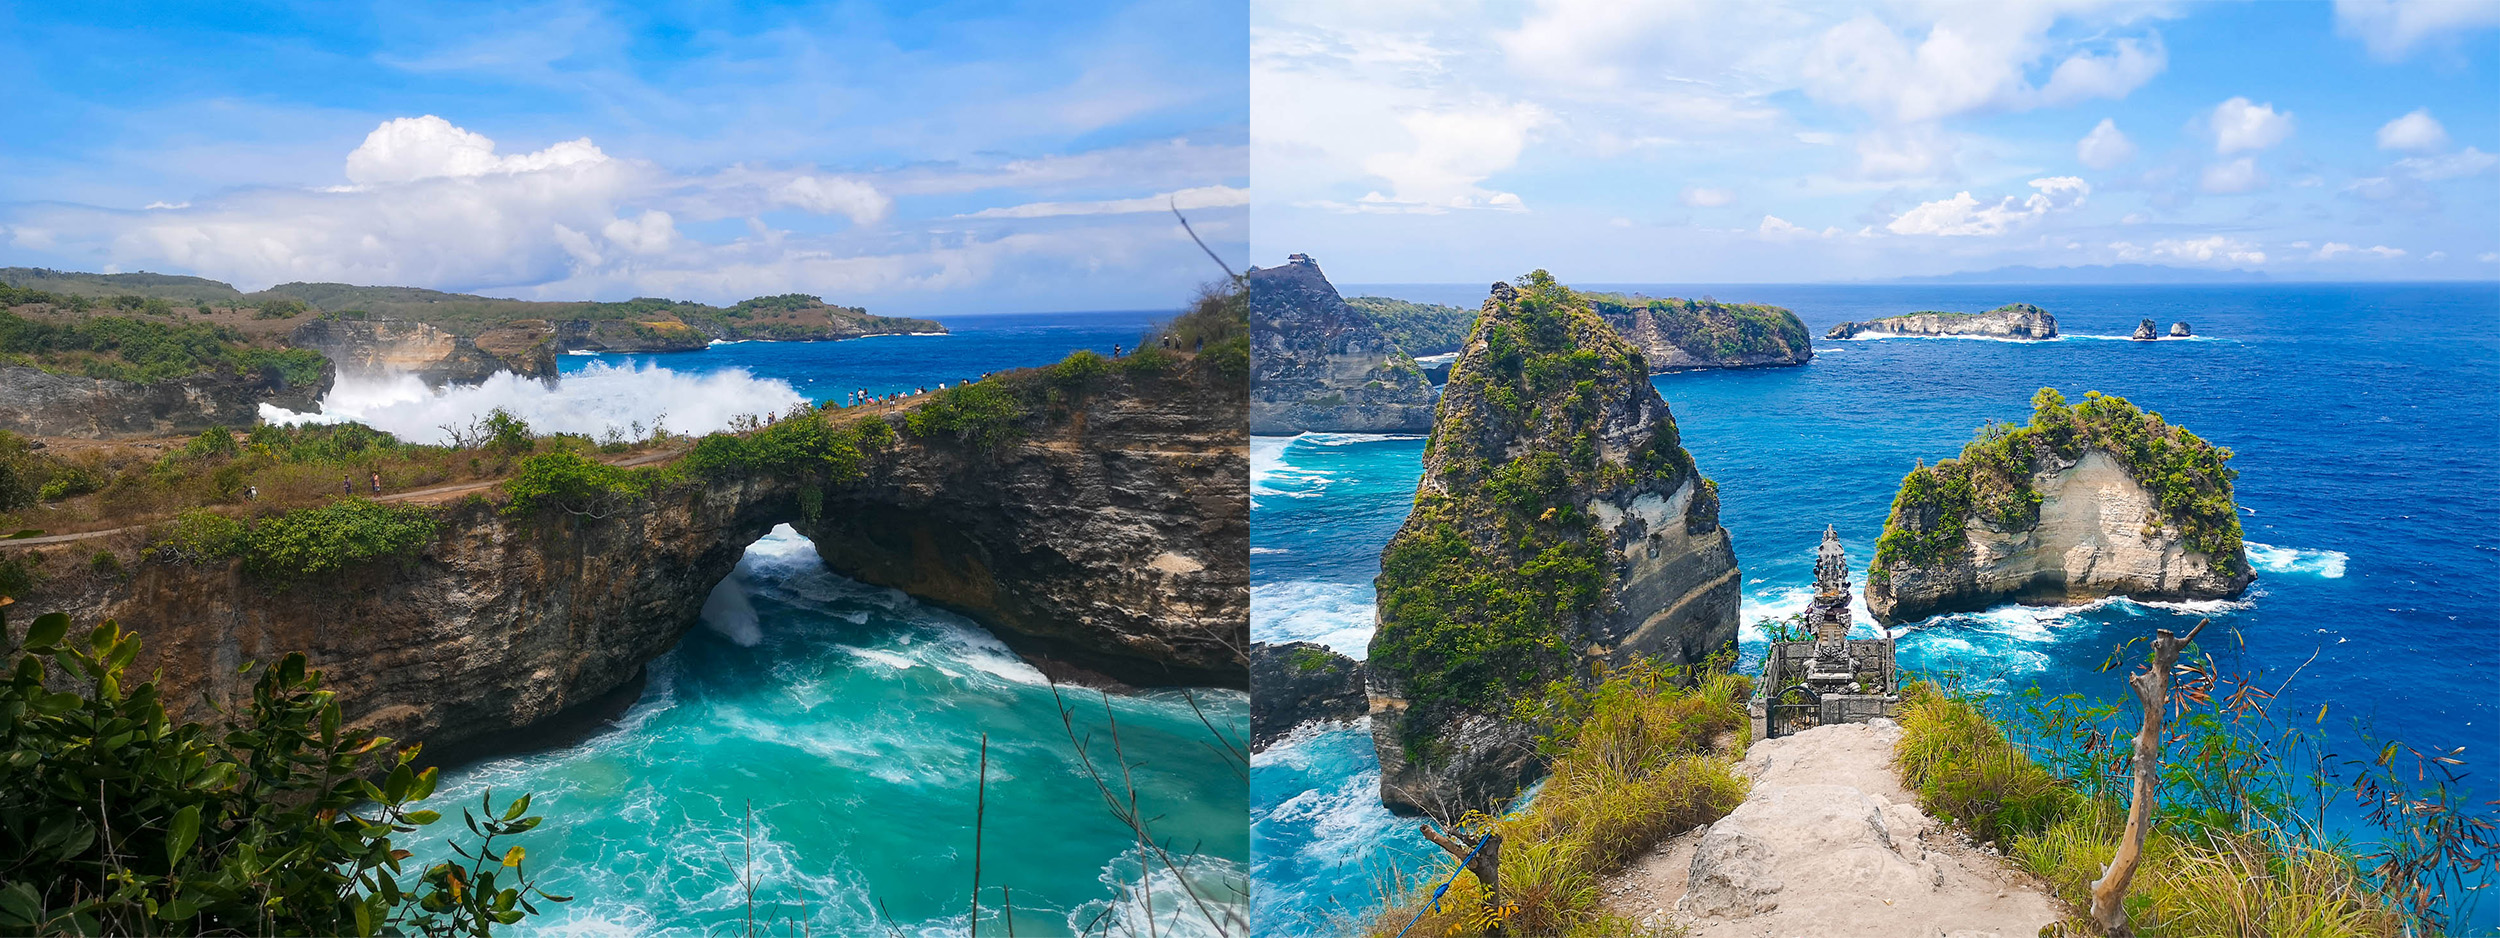 Which Tour is Better? West or East Nusa Penida, Bali - Connecting the Dots